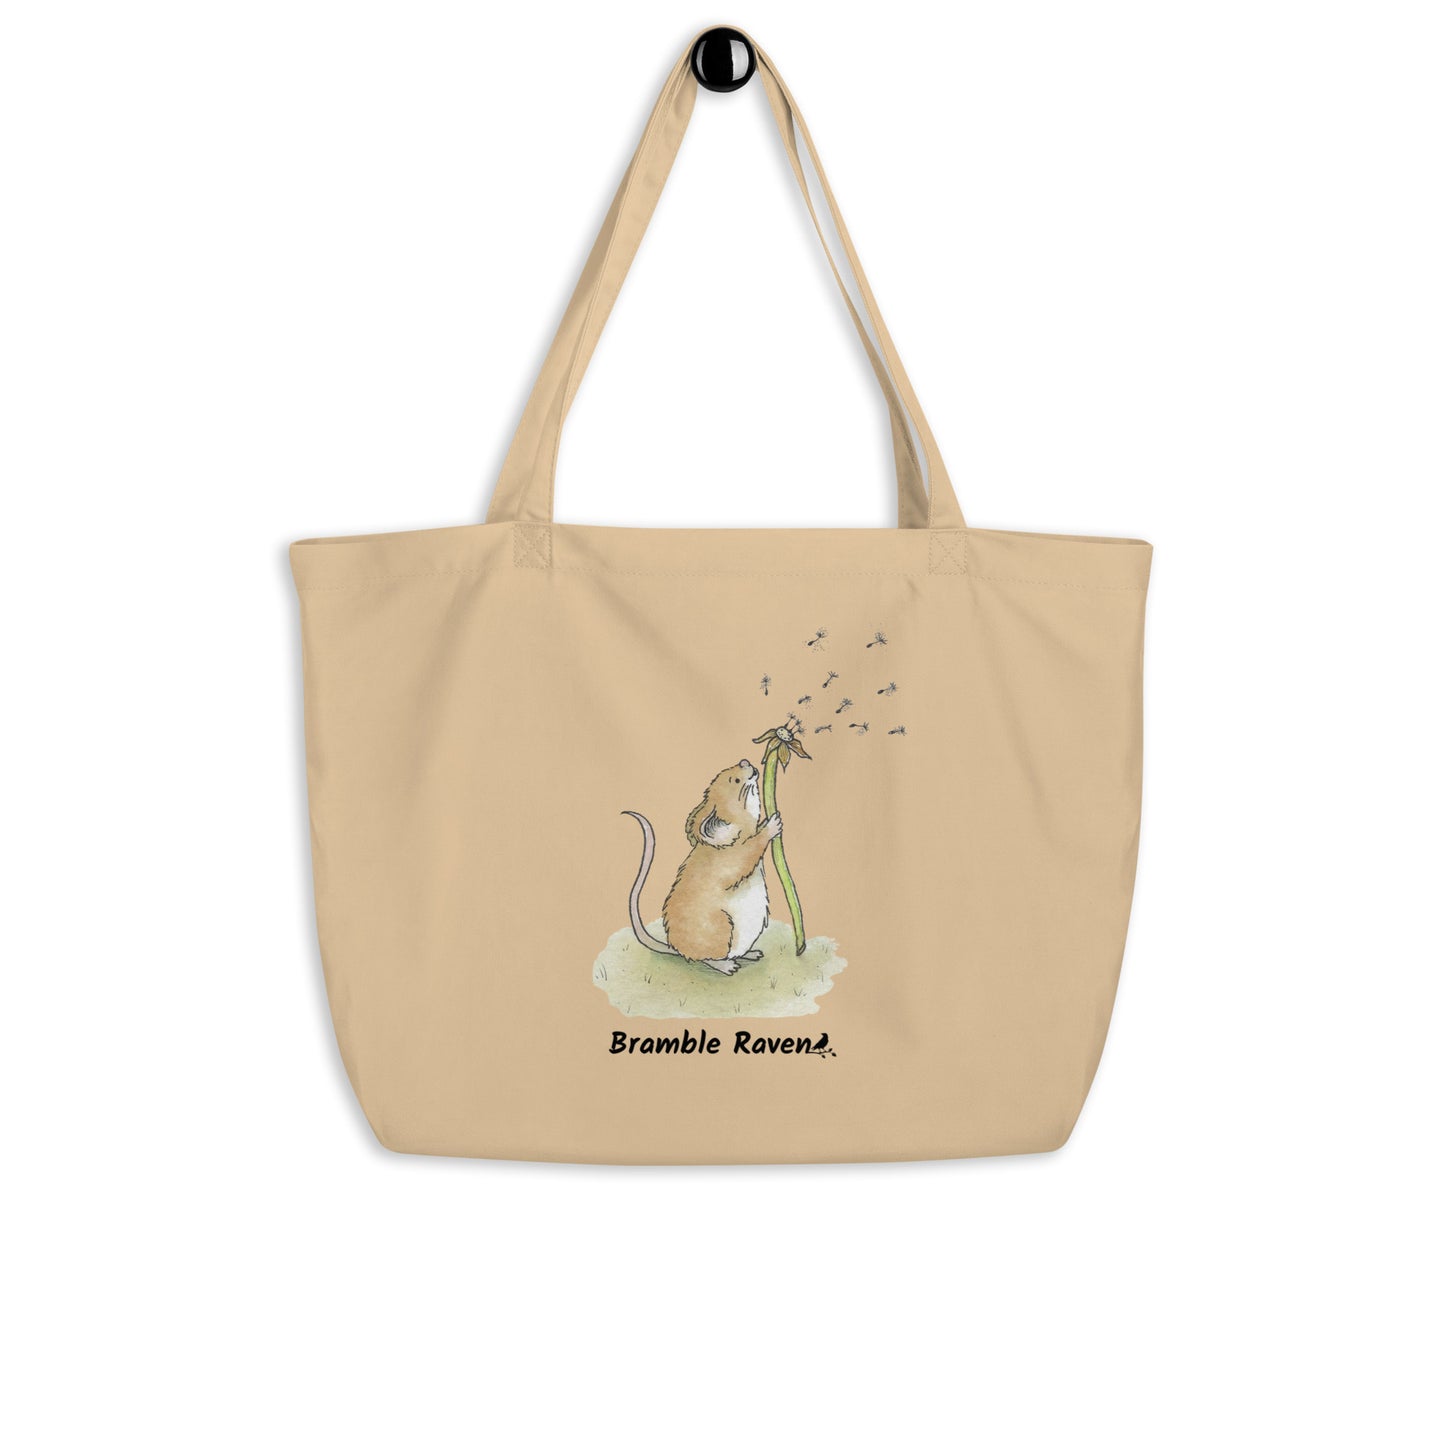 Original watercolor Dandelion wish design of a cute mouse blowing dandelion seeds. Printed on large oyster-colored eco tote. 20 by 14 by 5 inches.